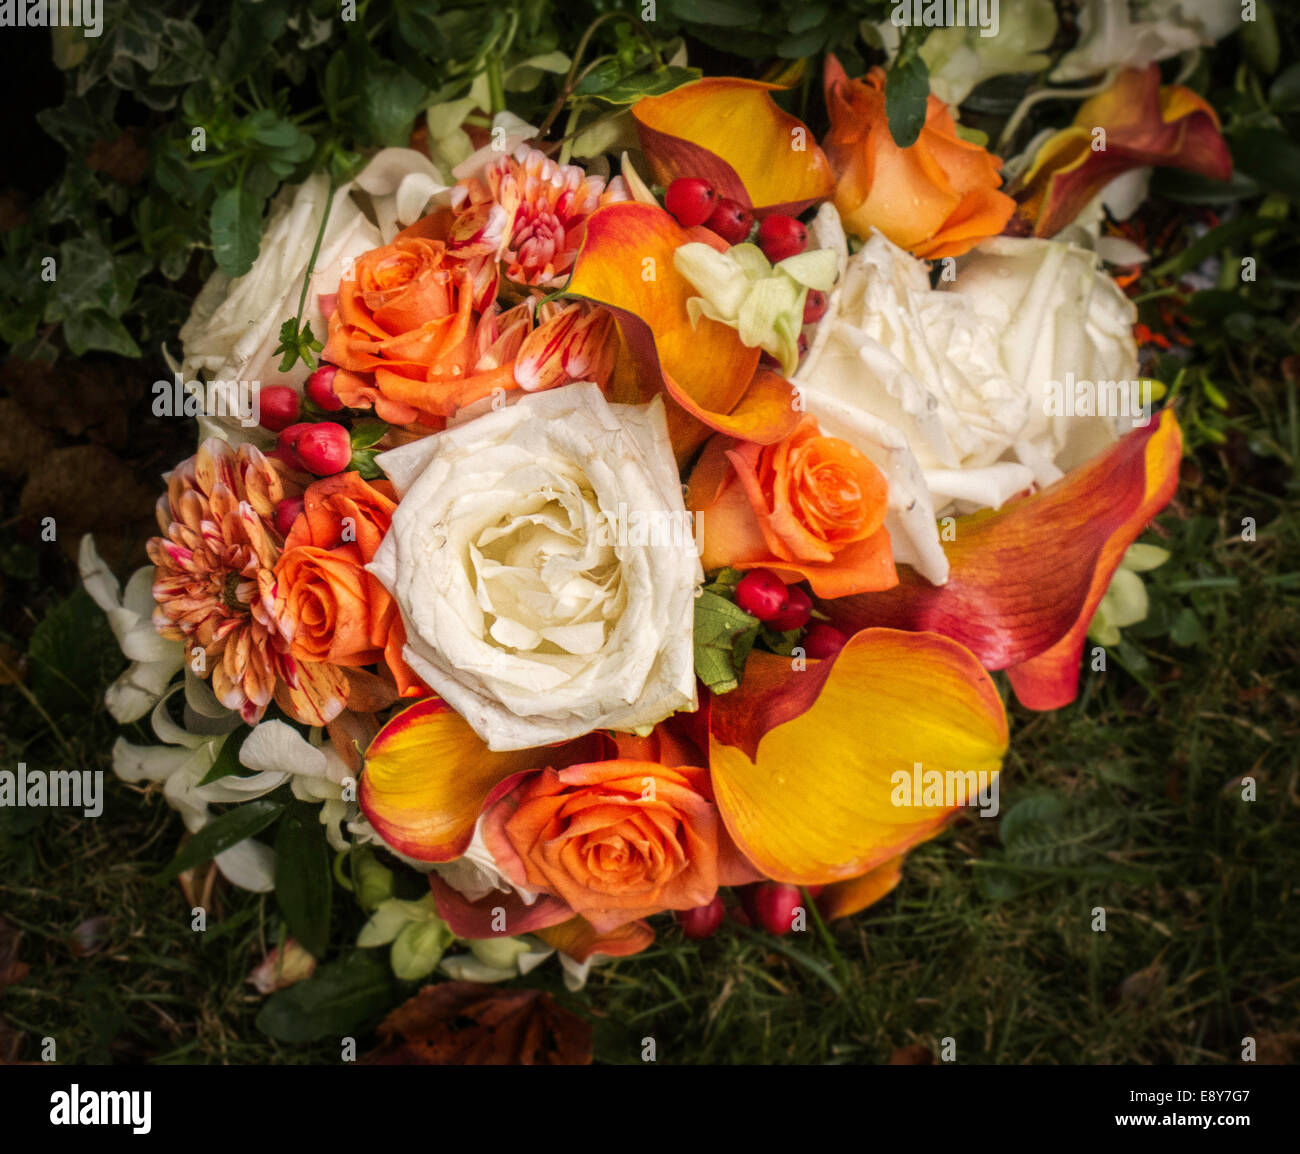 A mixed Bouquet of  autumn coloured flowers roses and berries Stock Photo